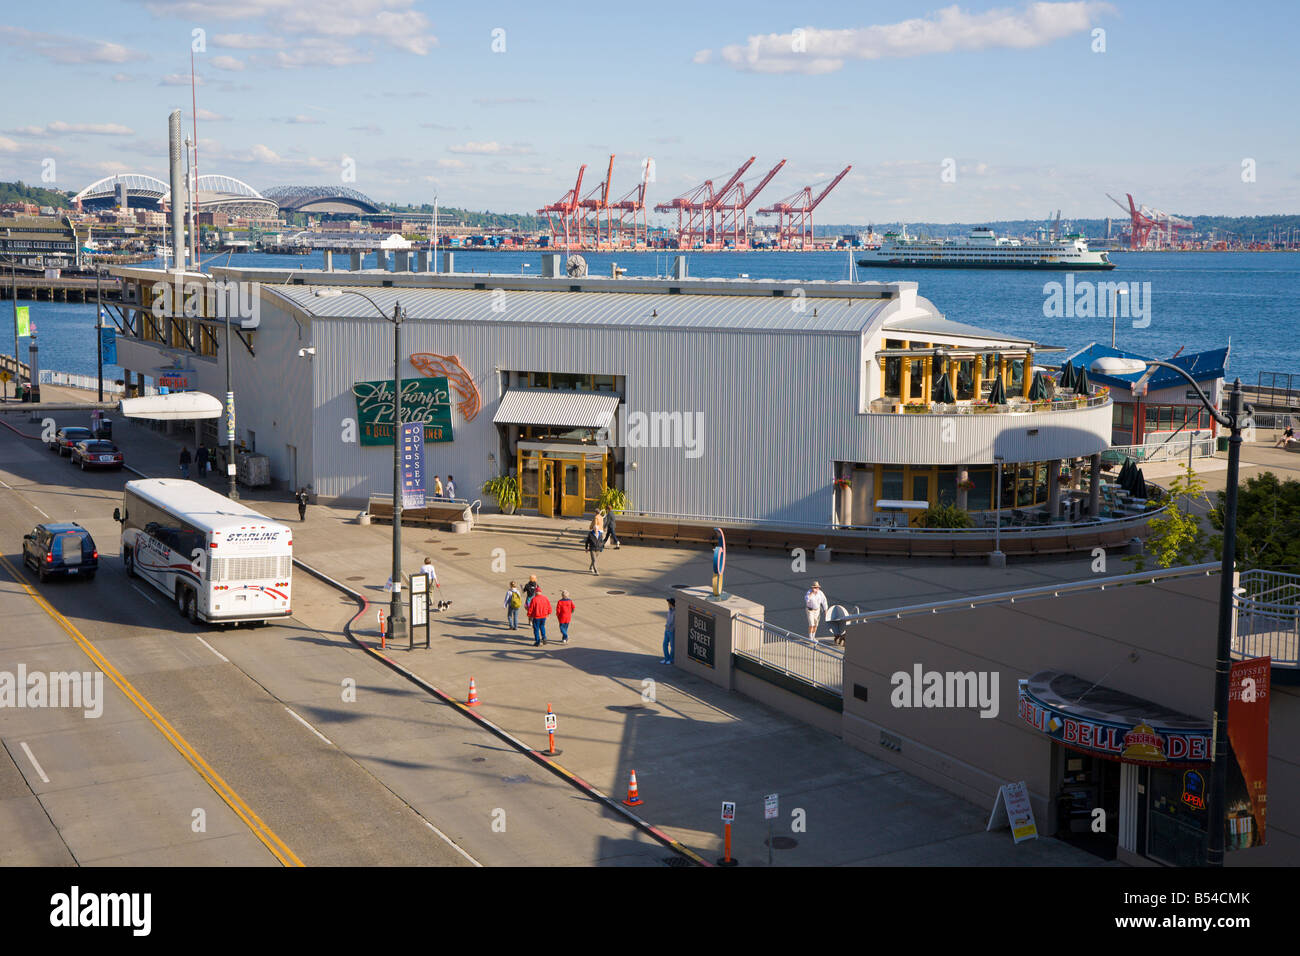 Anthony's Pier 66 restaurant along waterfront in downtown Seattle, Washington Stock Photo